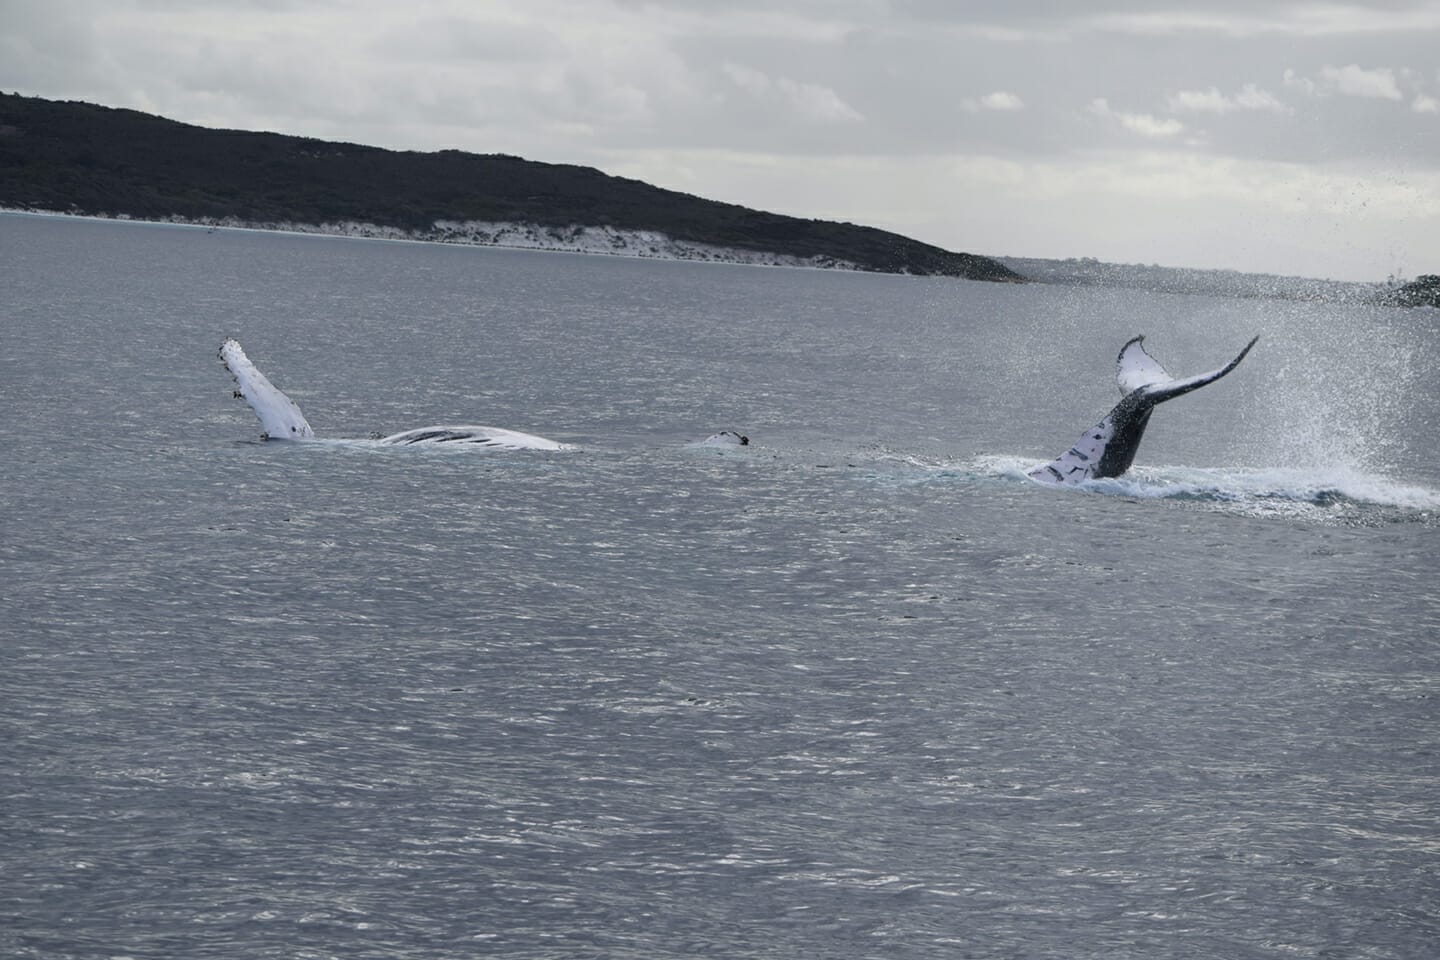 Two Humpback Whales playing in King George Sound, Albany. Photo Credit: Nathan